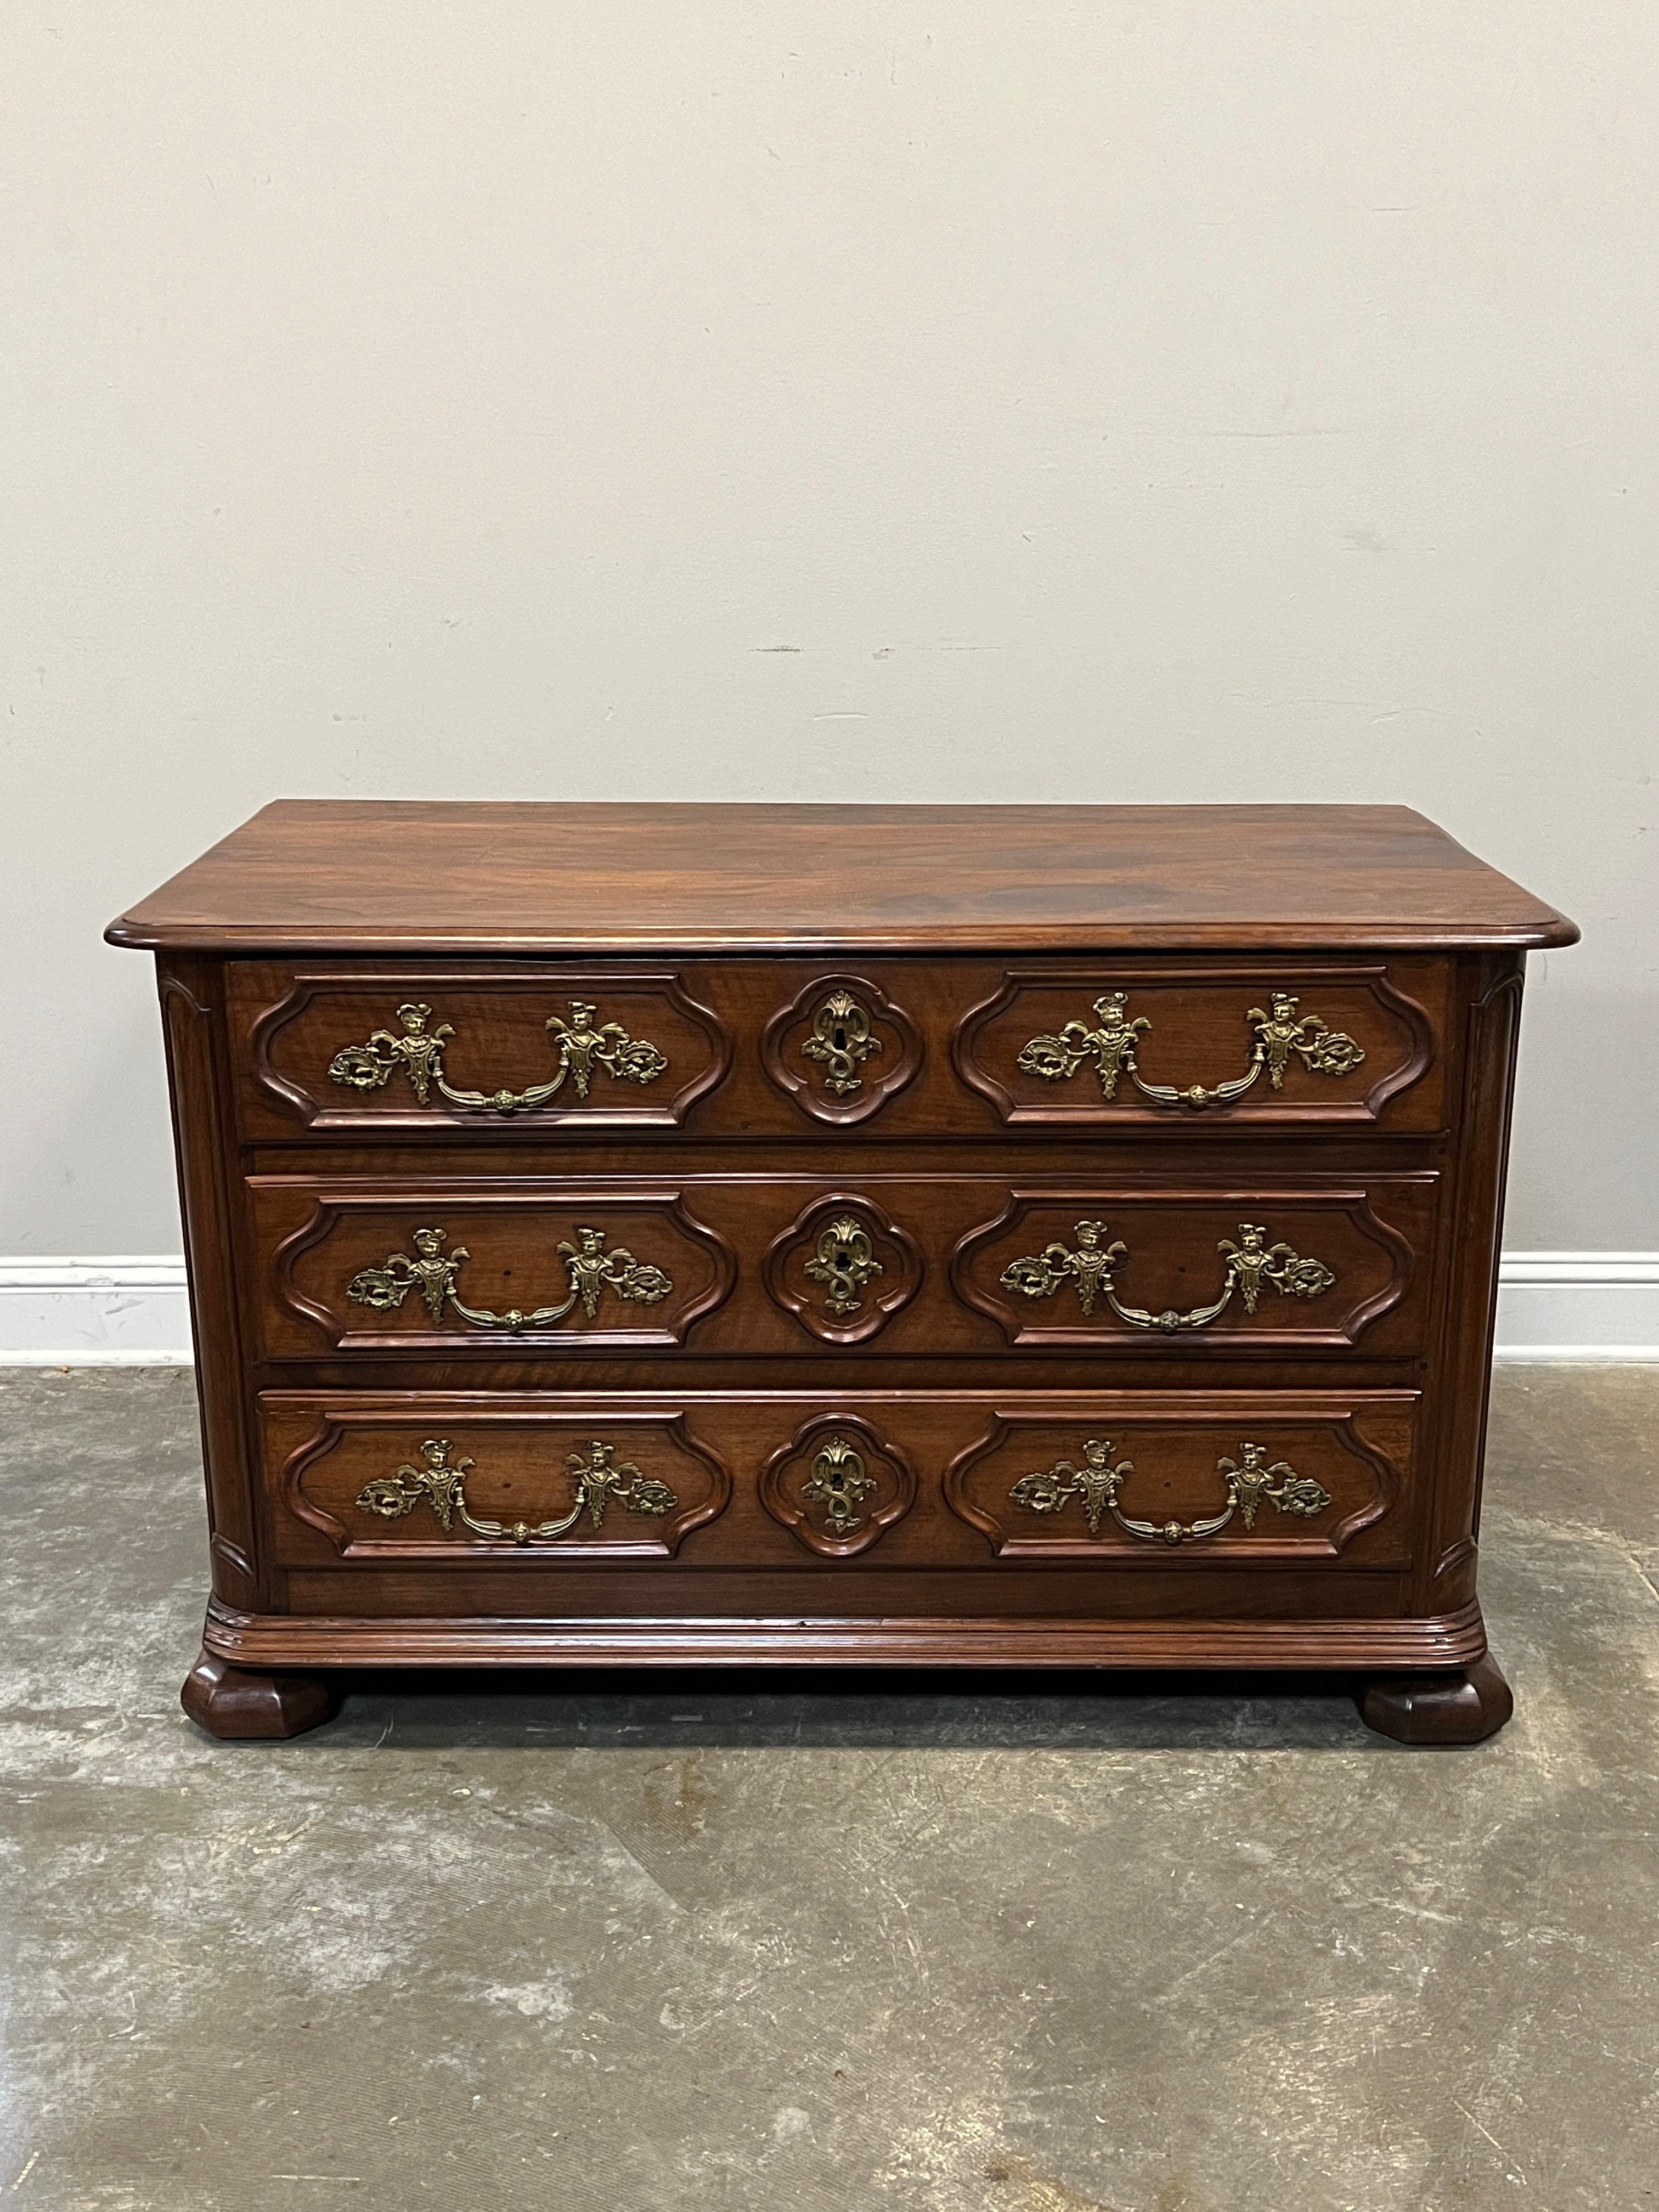 Generously sized French walnut commode in a transition style from the earlier Louis XIII and Louis XIV style with heavier look, bun feet to the lighter style of Louis XV with decorated drawer fronts. Drawers exhibit the lozenge shapes common to